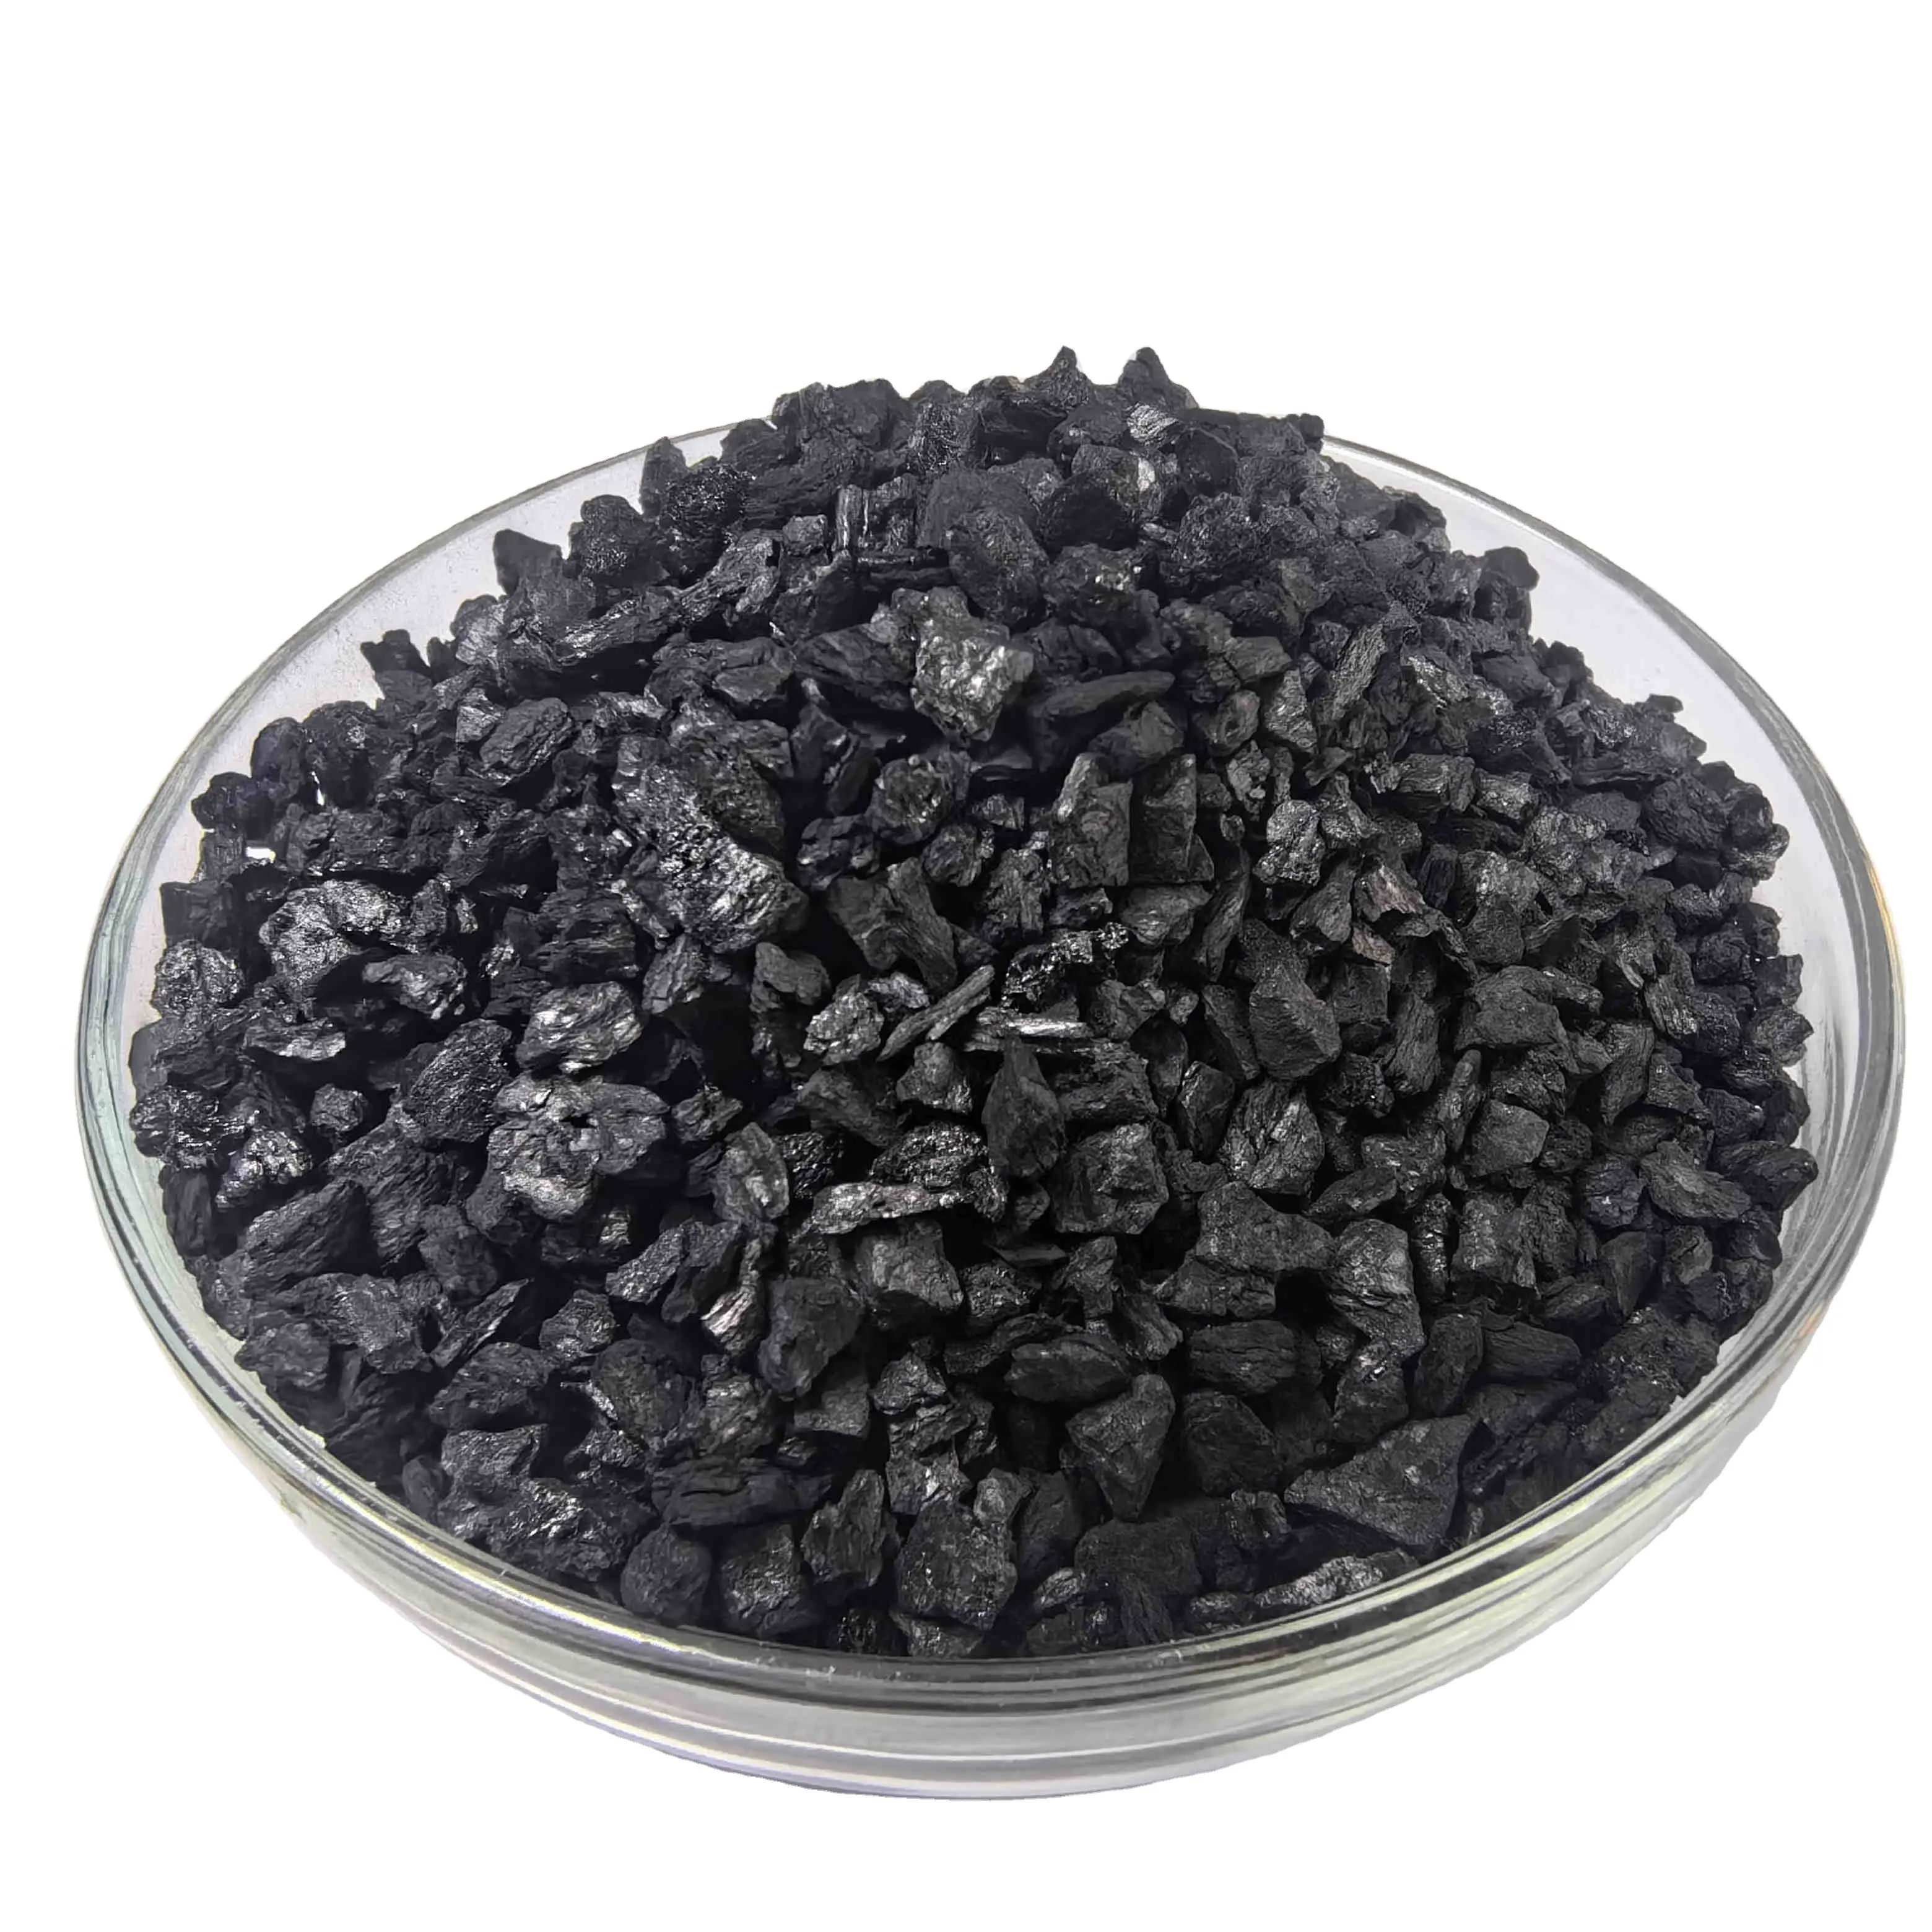 Sell High Quality At Good Price Coal Based Activated Carbon Price Activated Carbon 4x8mesh